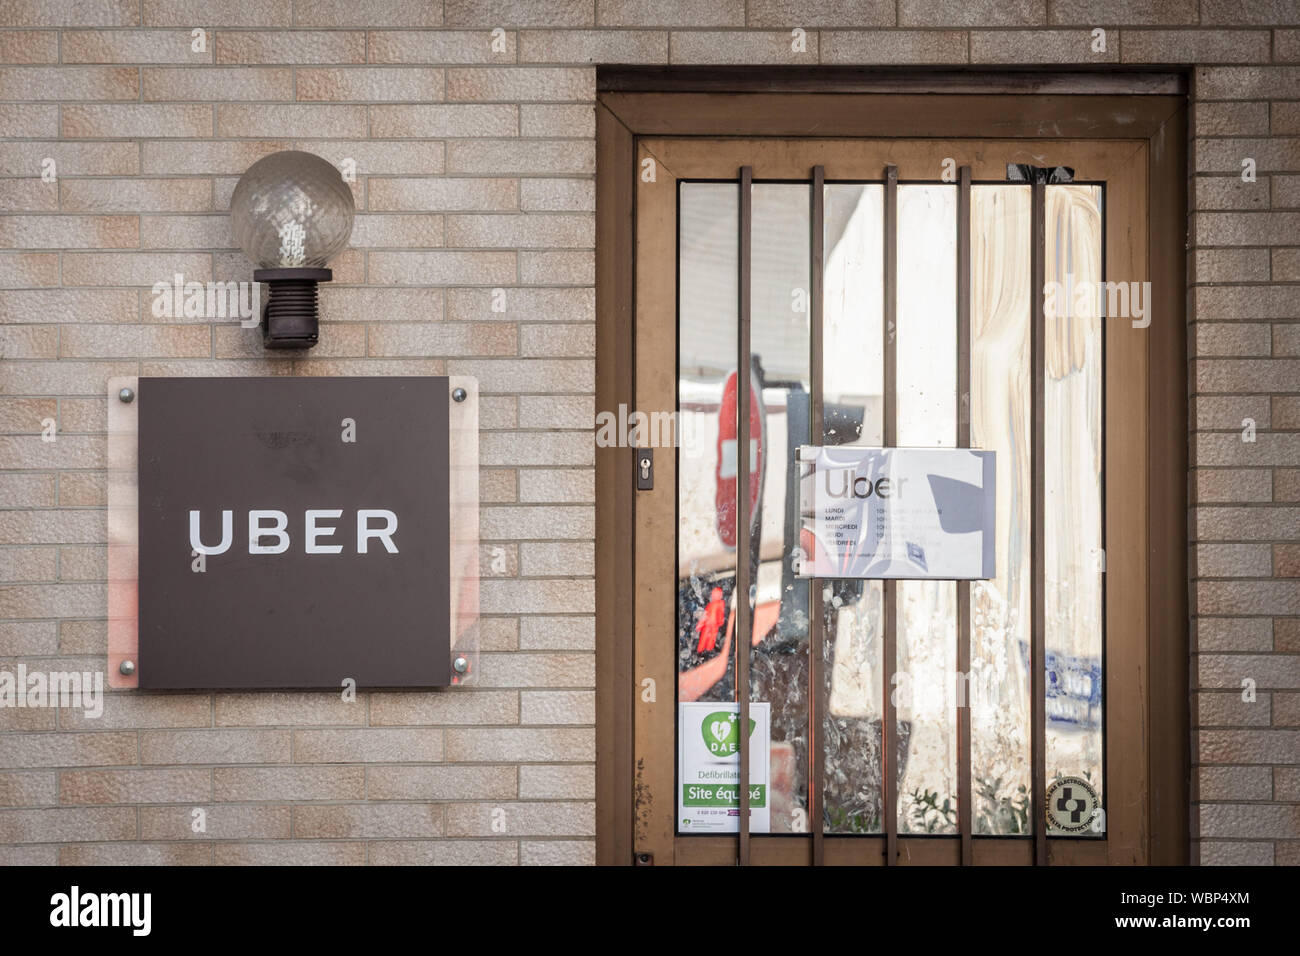 LYON, FRANCE - JULY 17, 2019: Uber Technologies logo on their office in Lyon. Uber is an American multinational transportation network company offerin Stock Photo